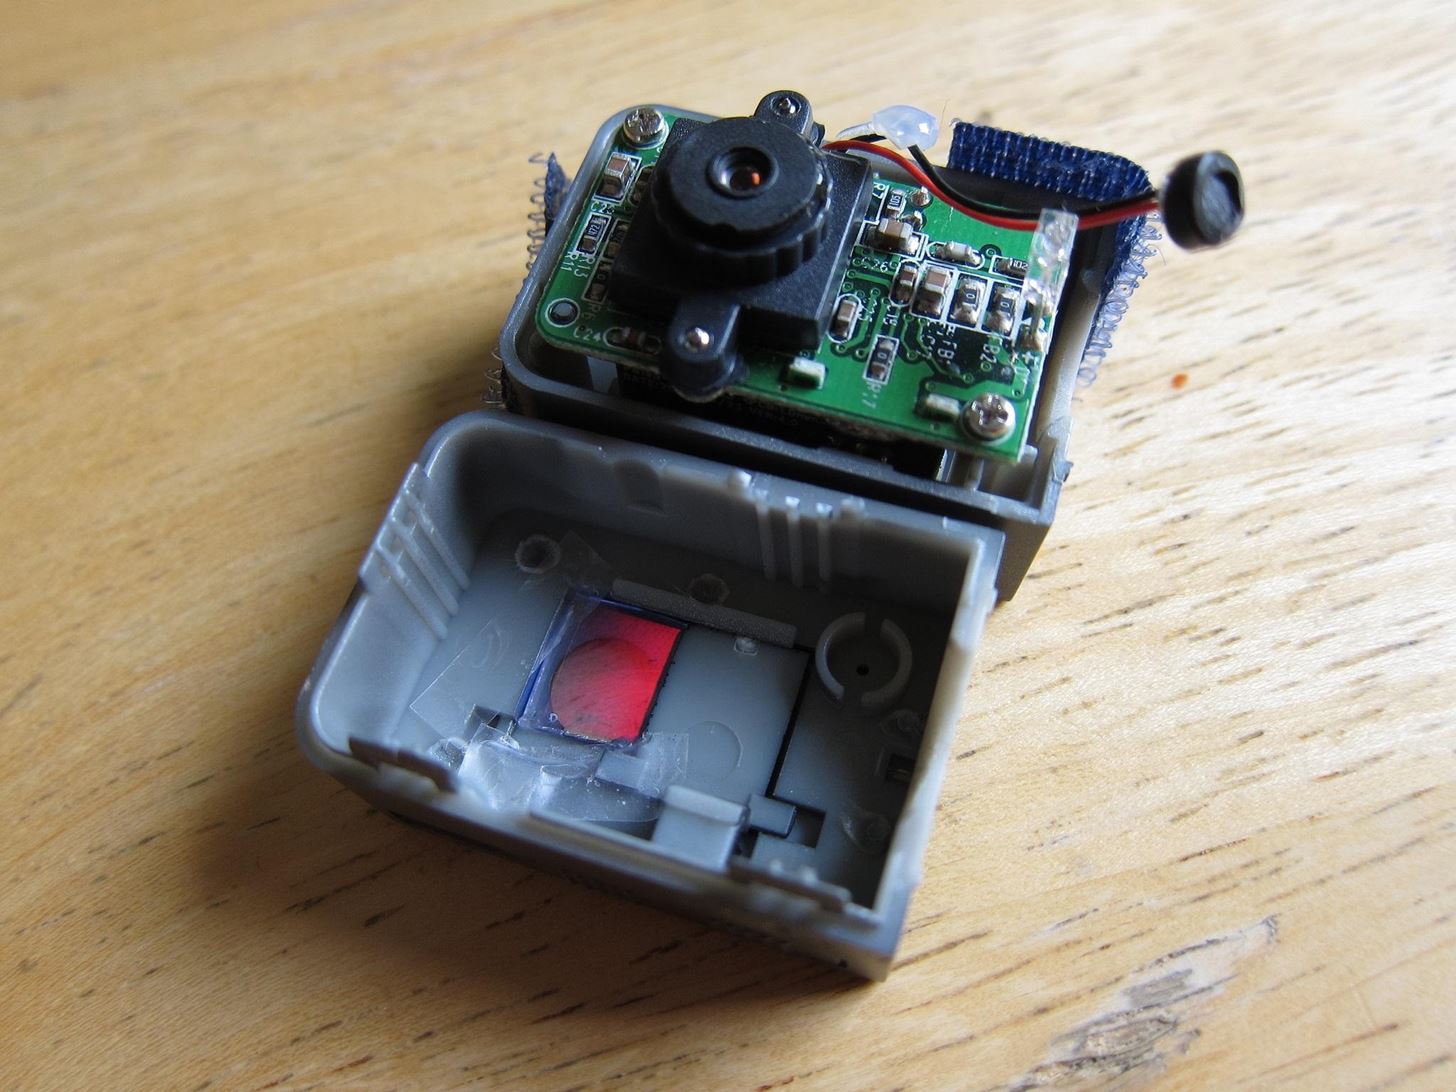 Discover the Hidden Colors in Everyday Objects with This DIY Video Spectrometer